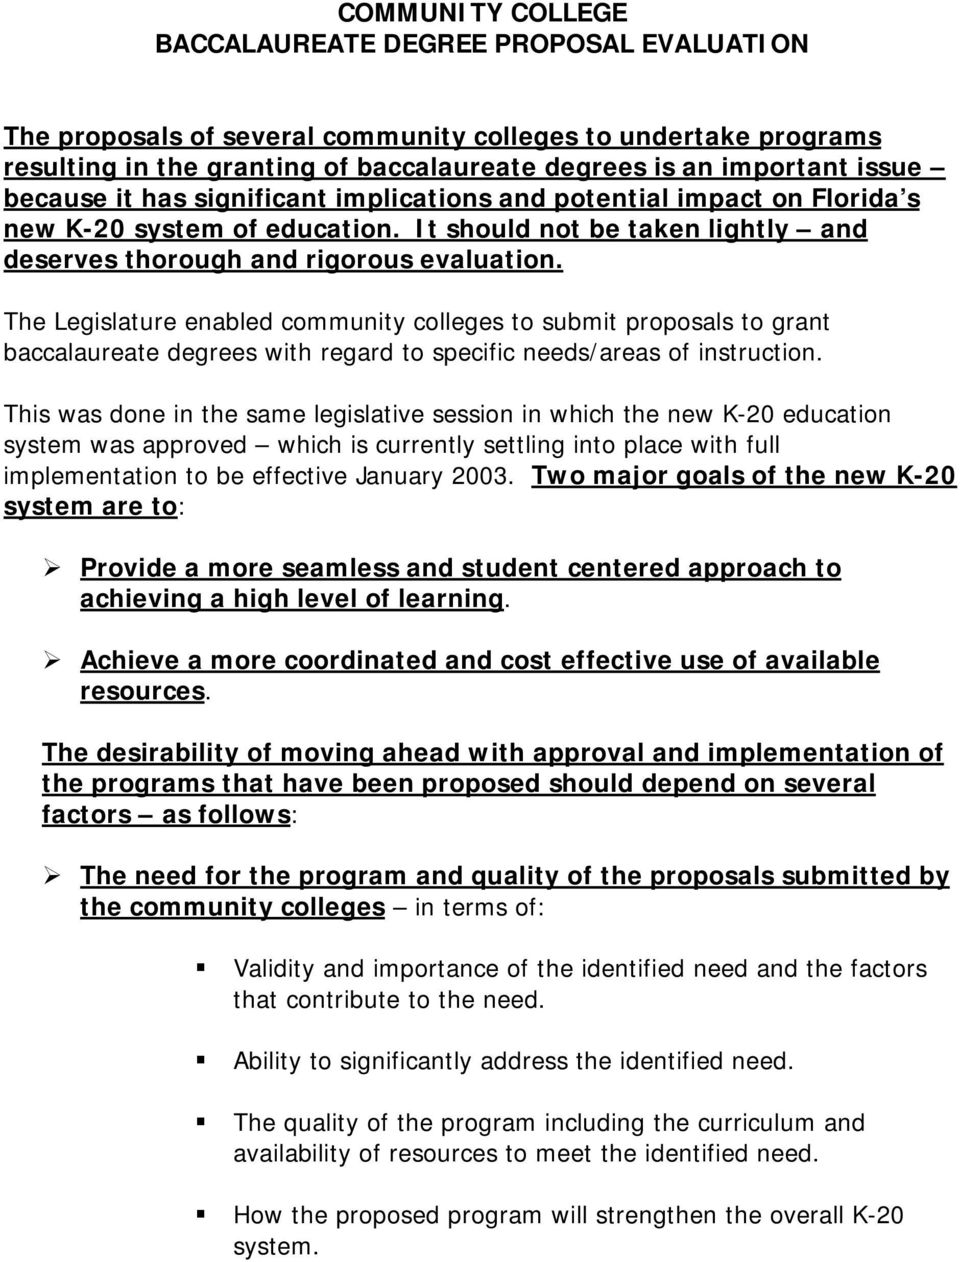 The Legislature enabled community colleges to submit proposals to grant baccalaureate degrees with regard to specific needs/areas of instruction.